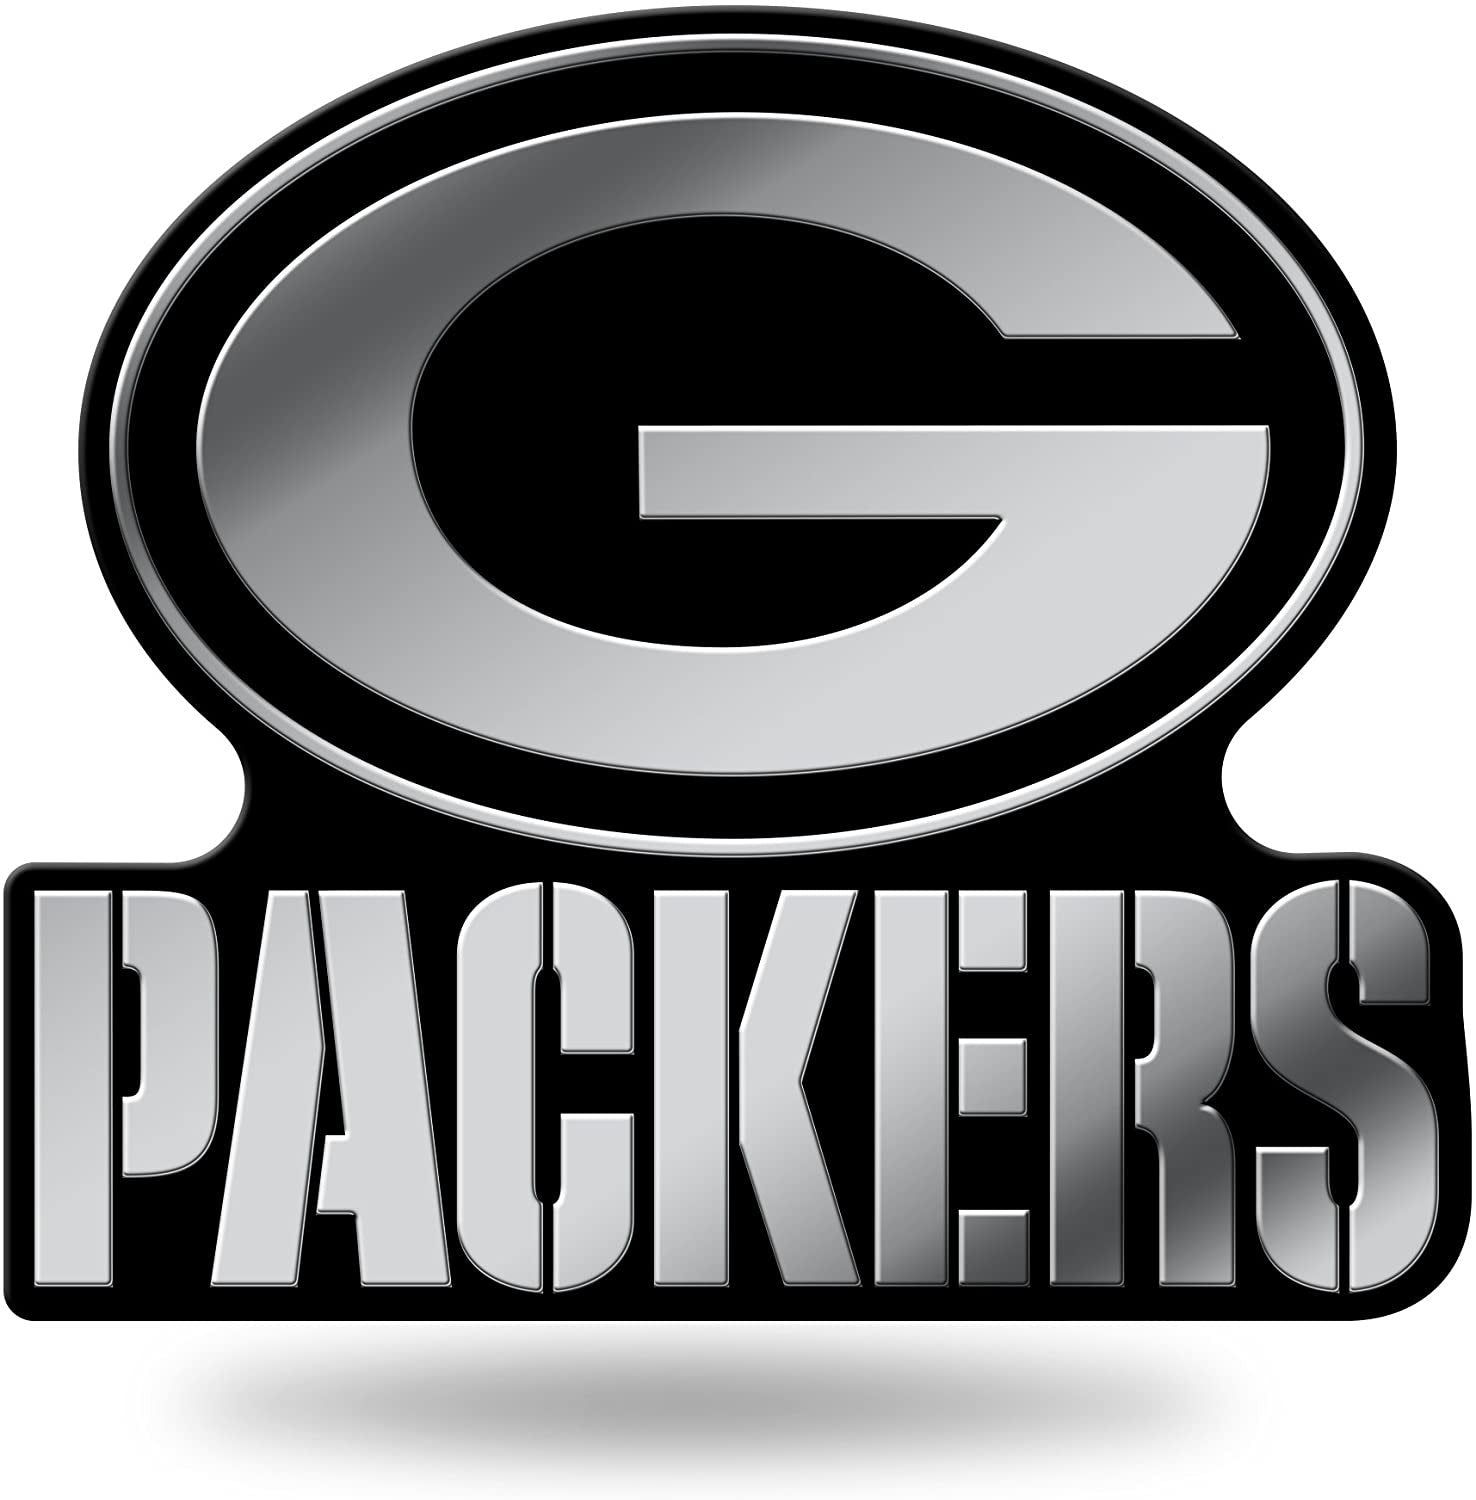 Green Bay Packers Auto Emblem, Silver Chrome Color, Raised Molded Plastic, 3.5 Inch, Adhesive Tape Backing